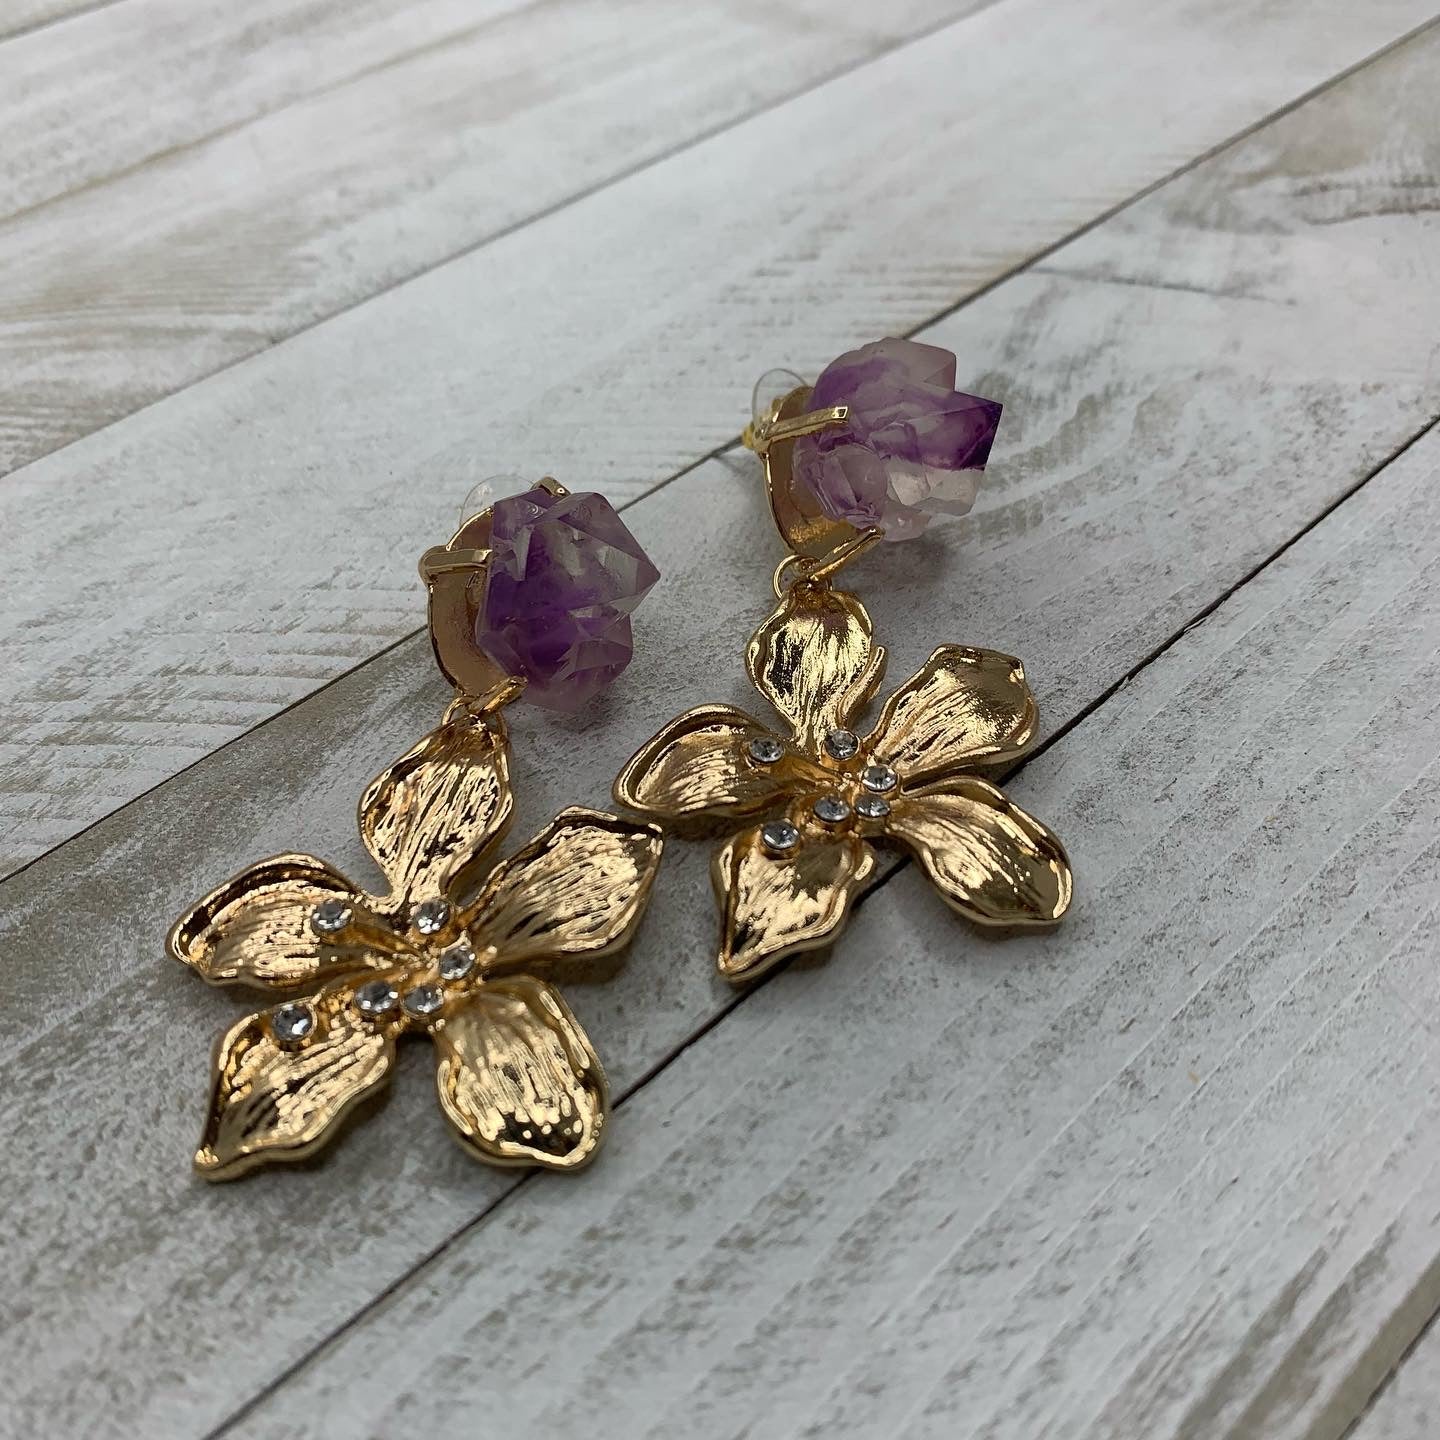 Gold Plated Earrings with Faux Amethyst Druzy and Flower Charm